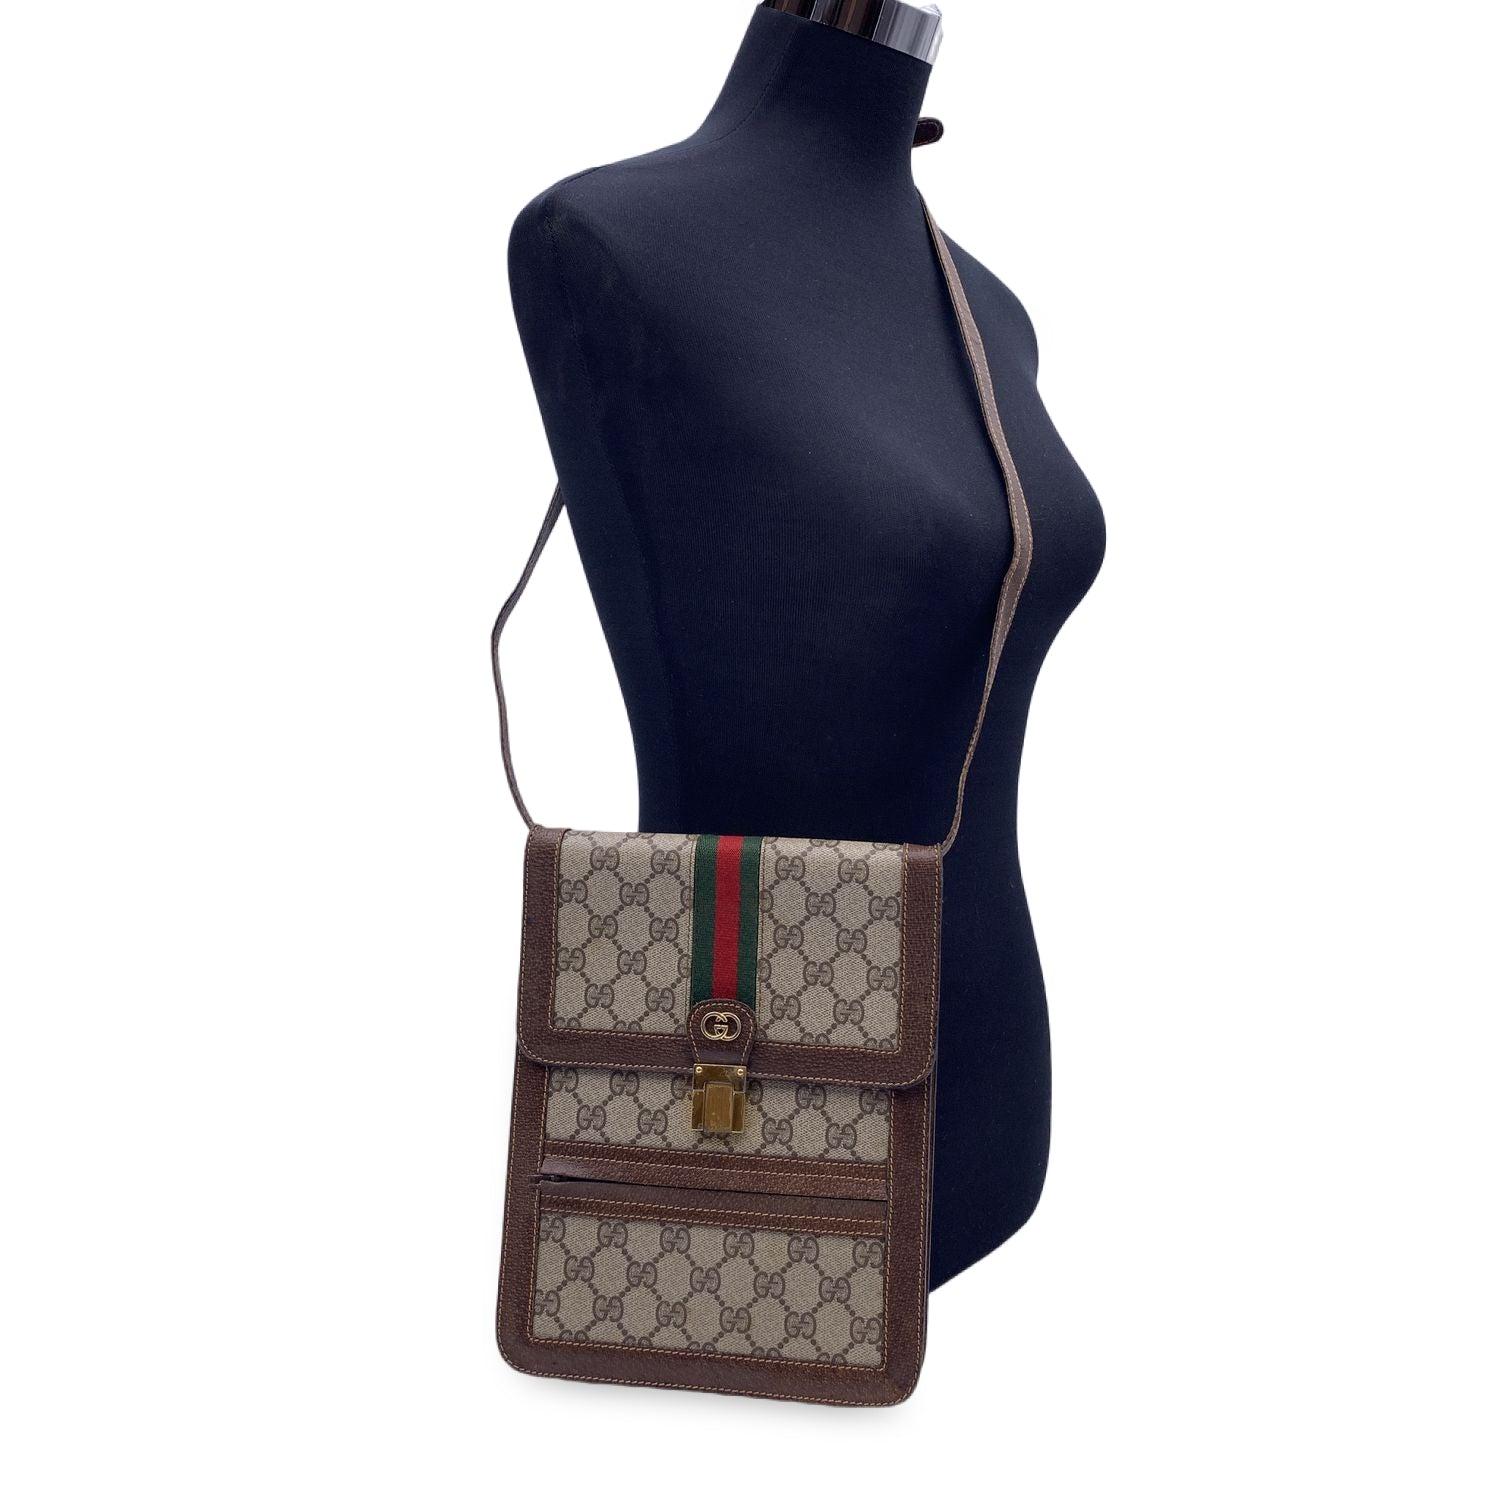 Vintage Gucci vertical shoulder bag. beige monogram canvas with brown genuine leather trim. Green/Red/Green GUCCI stripes detailing on the flap. Gold metal GG - GUCCI logo on the front. Flap with clasp closure. 1 front zip pocket. Removable &